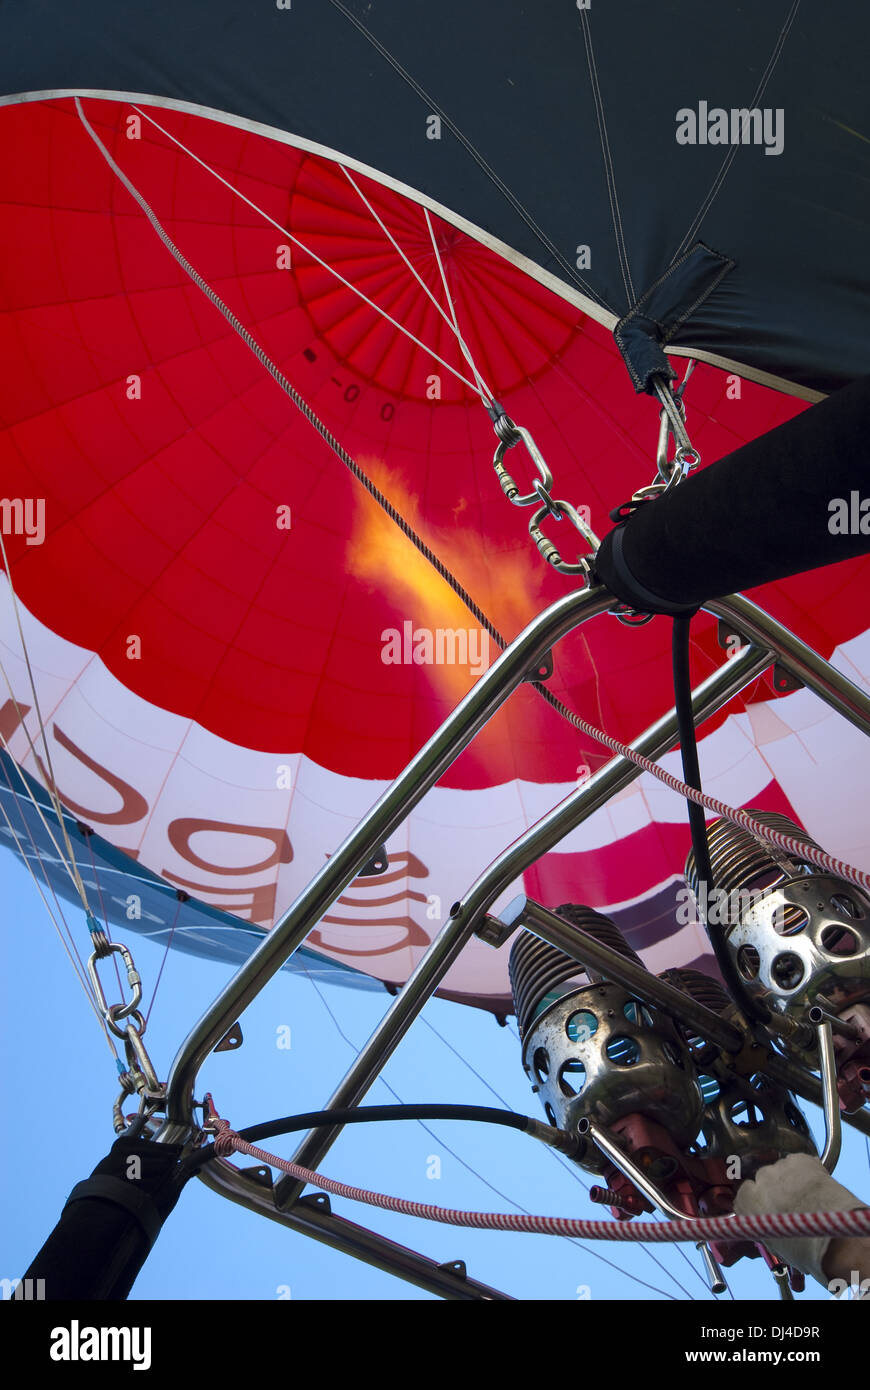 Hot air balloon with burner and flame Stock Photo